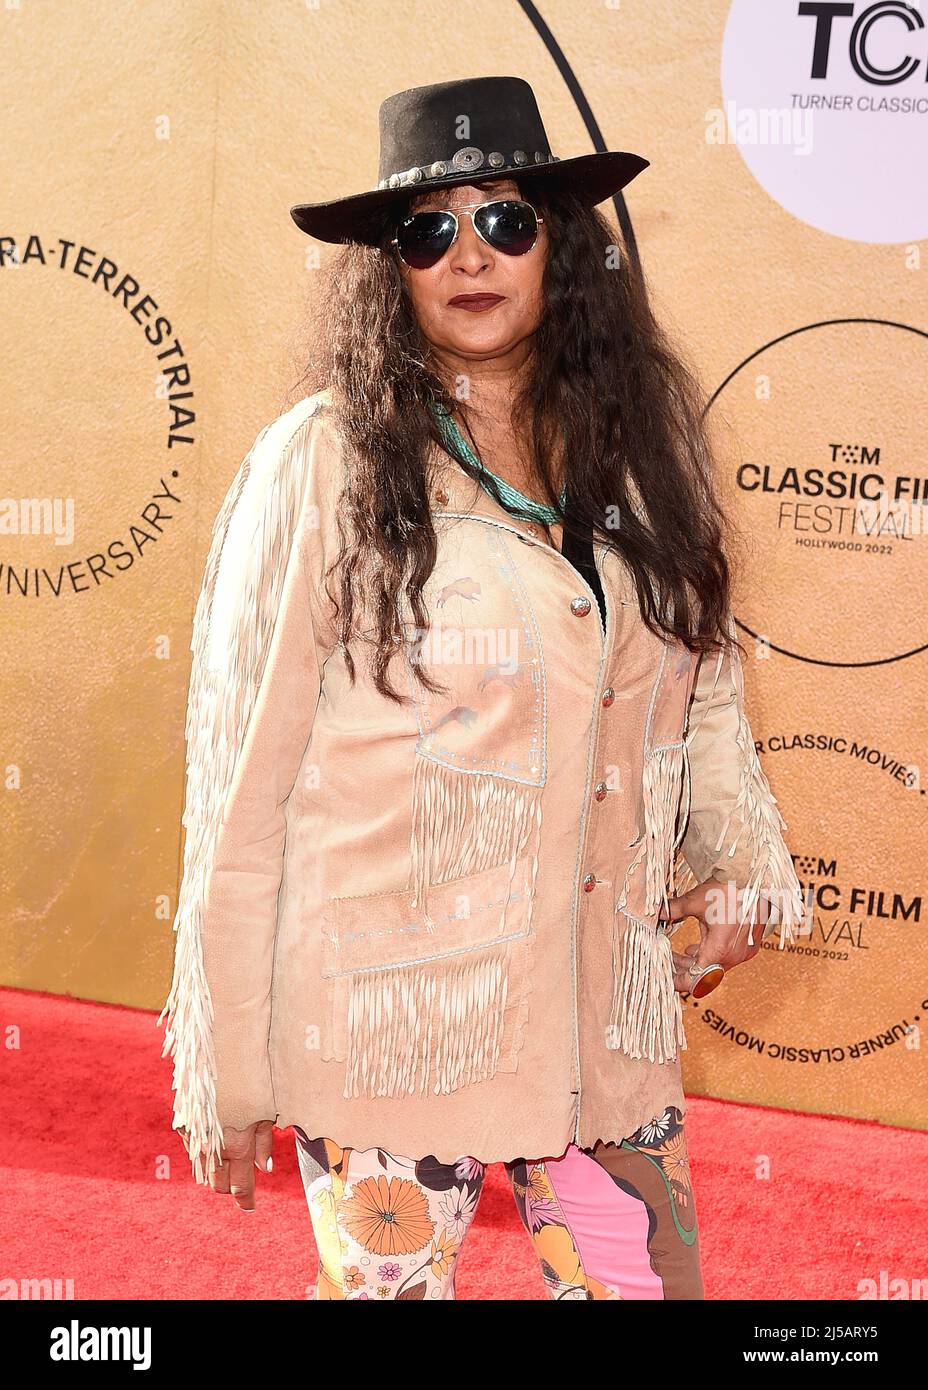 Los Angeles, USA. 21st Apr, 2022. Pam Grier walking on the red carpet at the 2022 TCM Classic Film Festival - 40th Anniversary Screening of 'E.T., the Extra-Terrestrial' at the TCL Chinese Theater in Los Angeles, CA on April 21, 2022. (Photo By Scott Kirkland/Sipa USA) Credit: Sipa USA/Alamy Live News Stock Photo